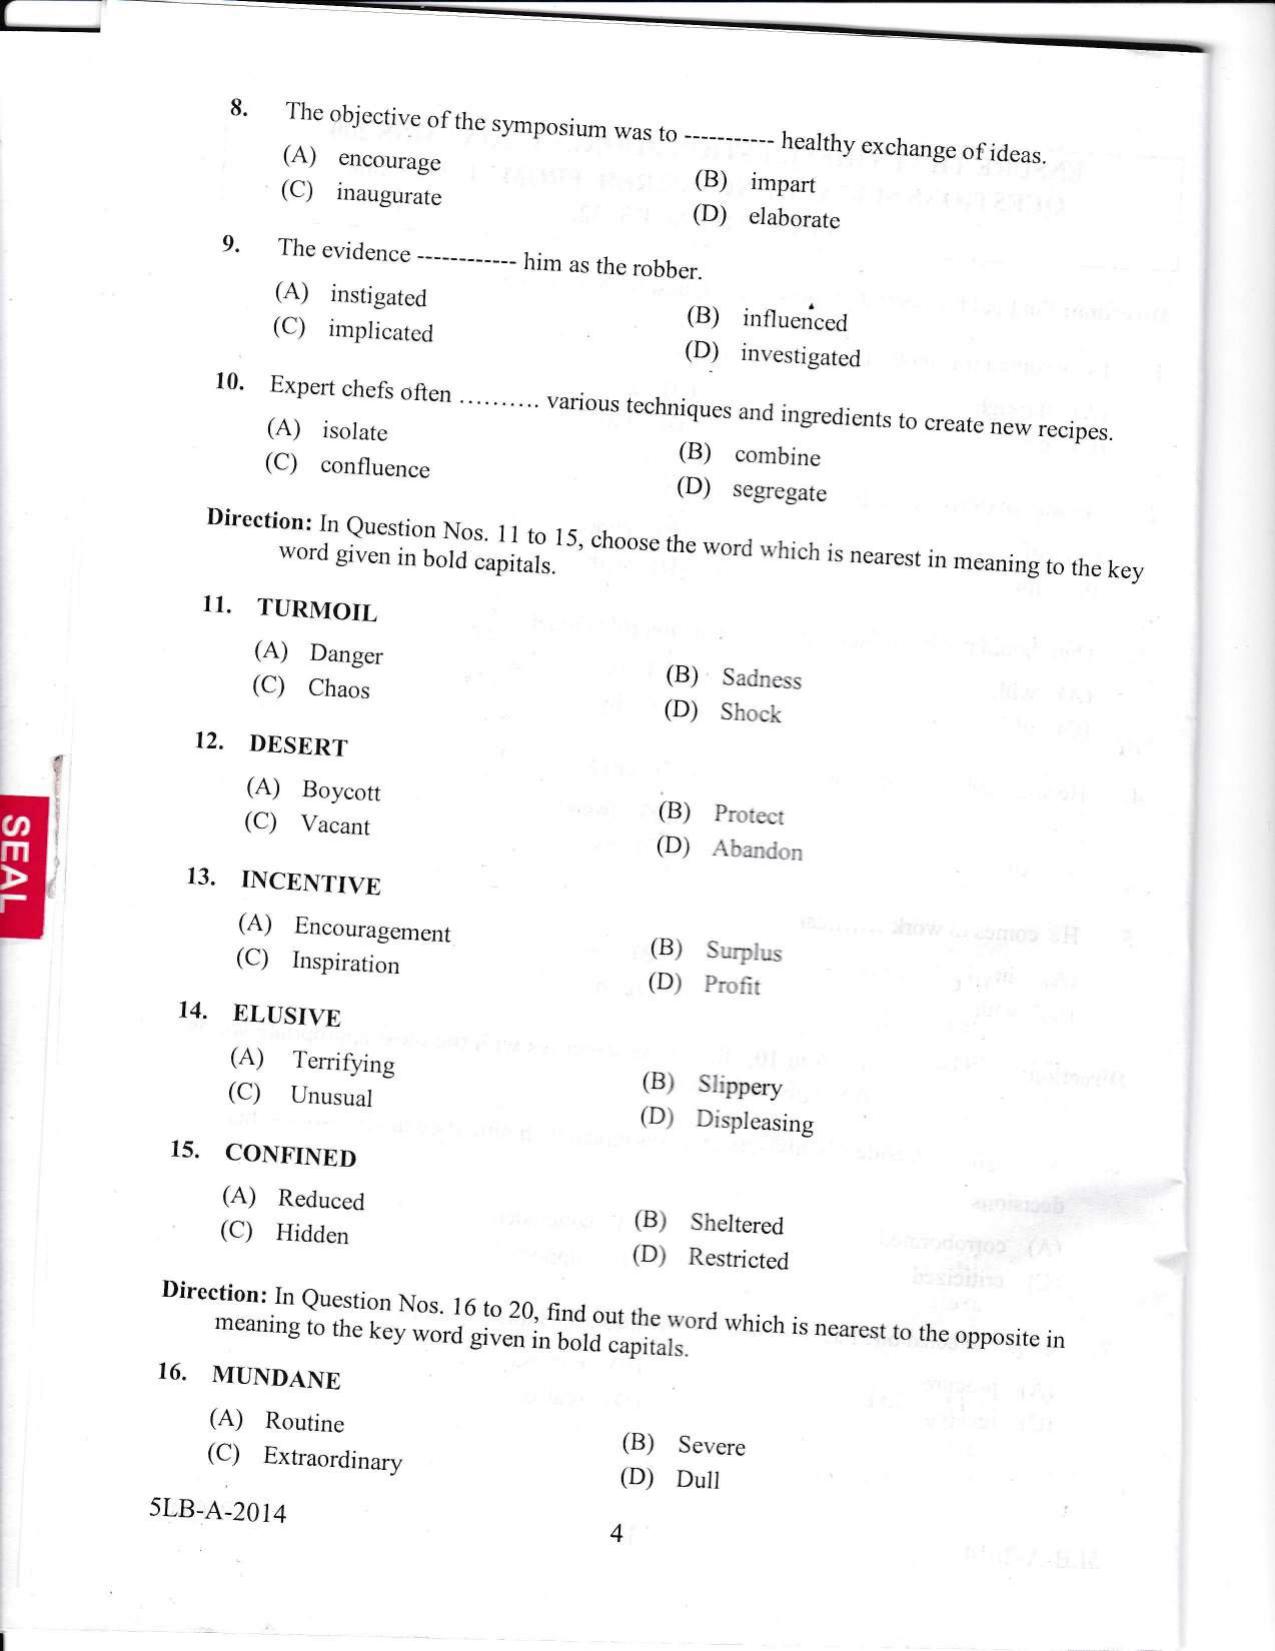 KLEE 5 Year LLB Exam 2014 Question Paper - Page 4